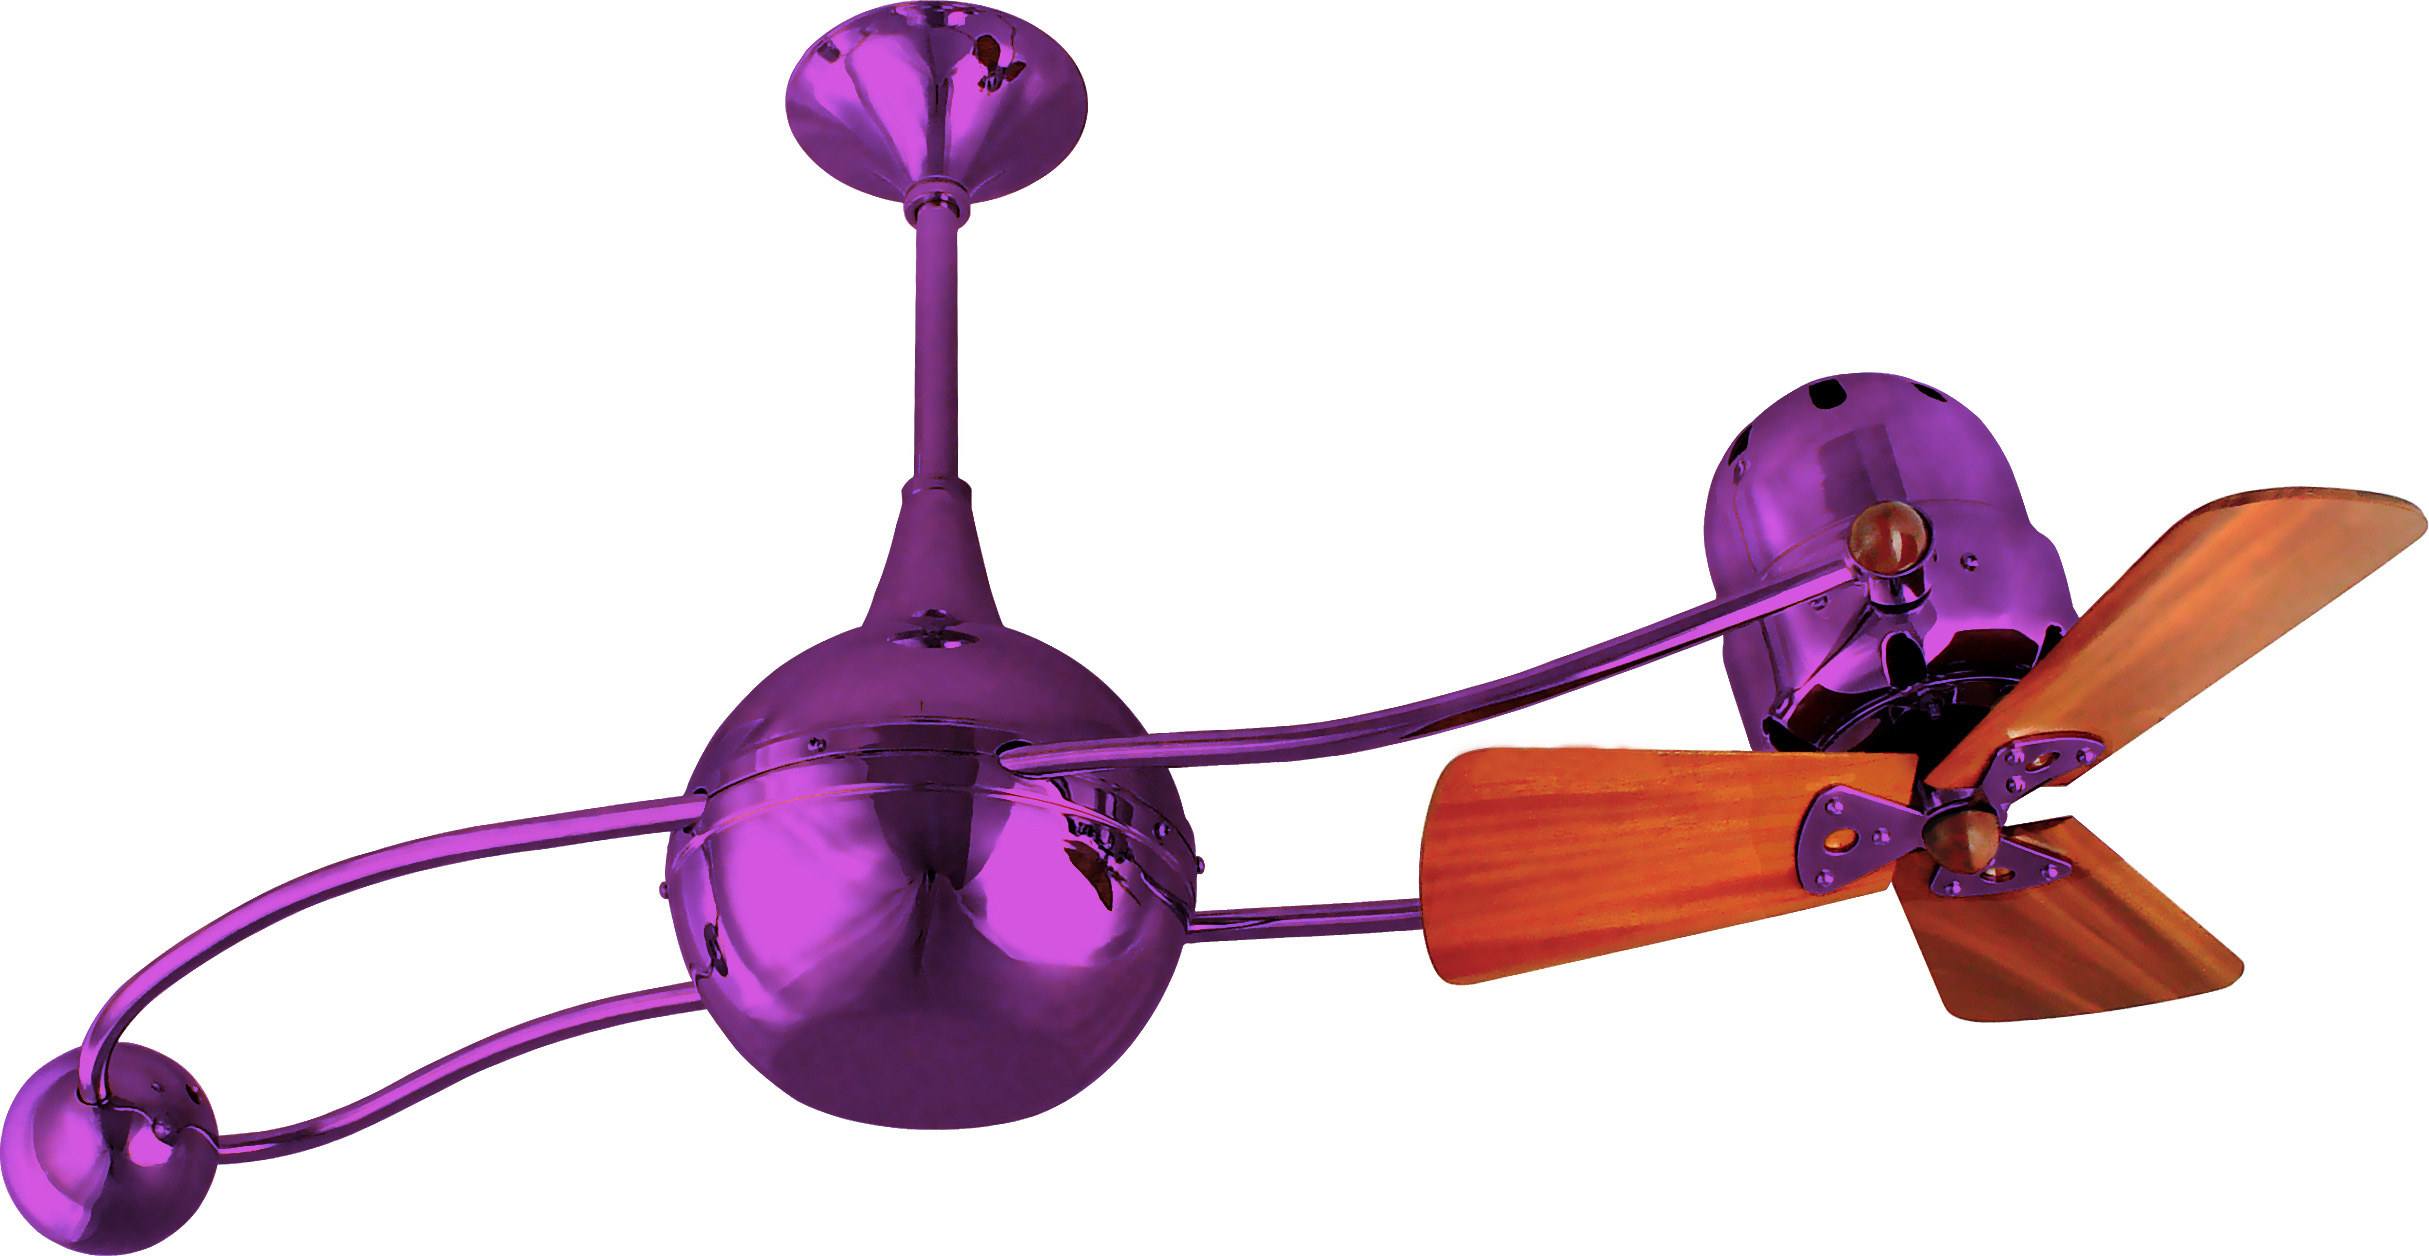 Brisa 2000 Ceiling Fan in Ametista / Light Purple Finish with Mahogany Wood Blades